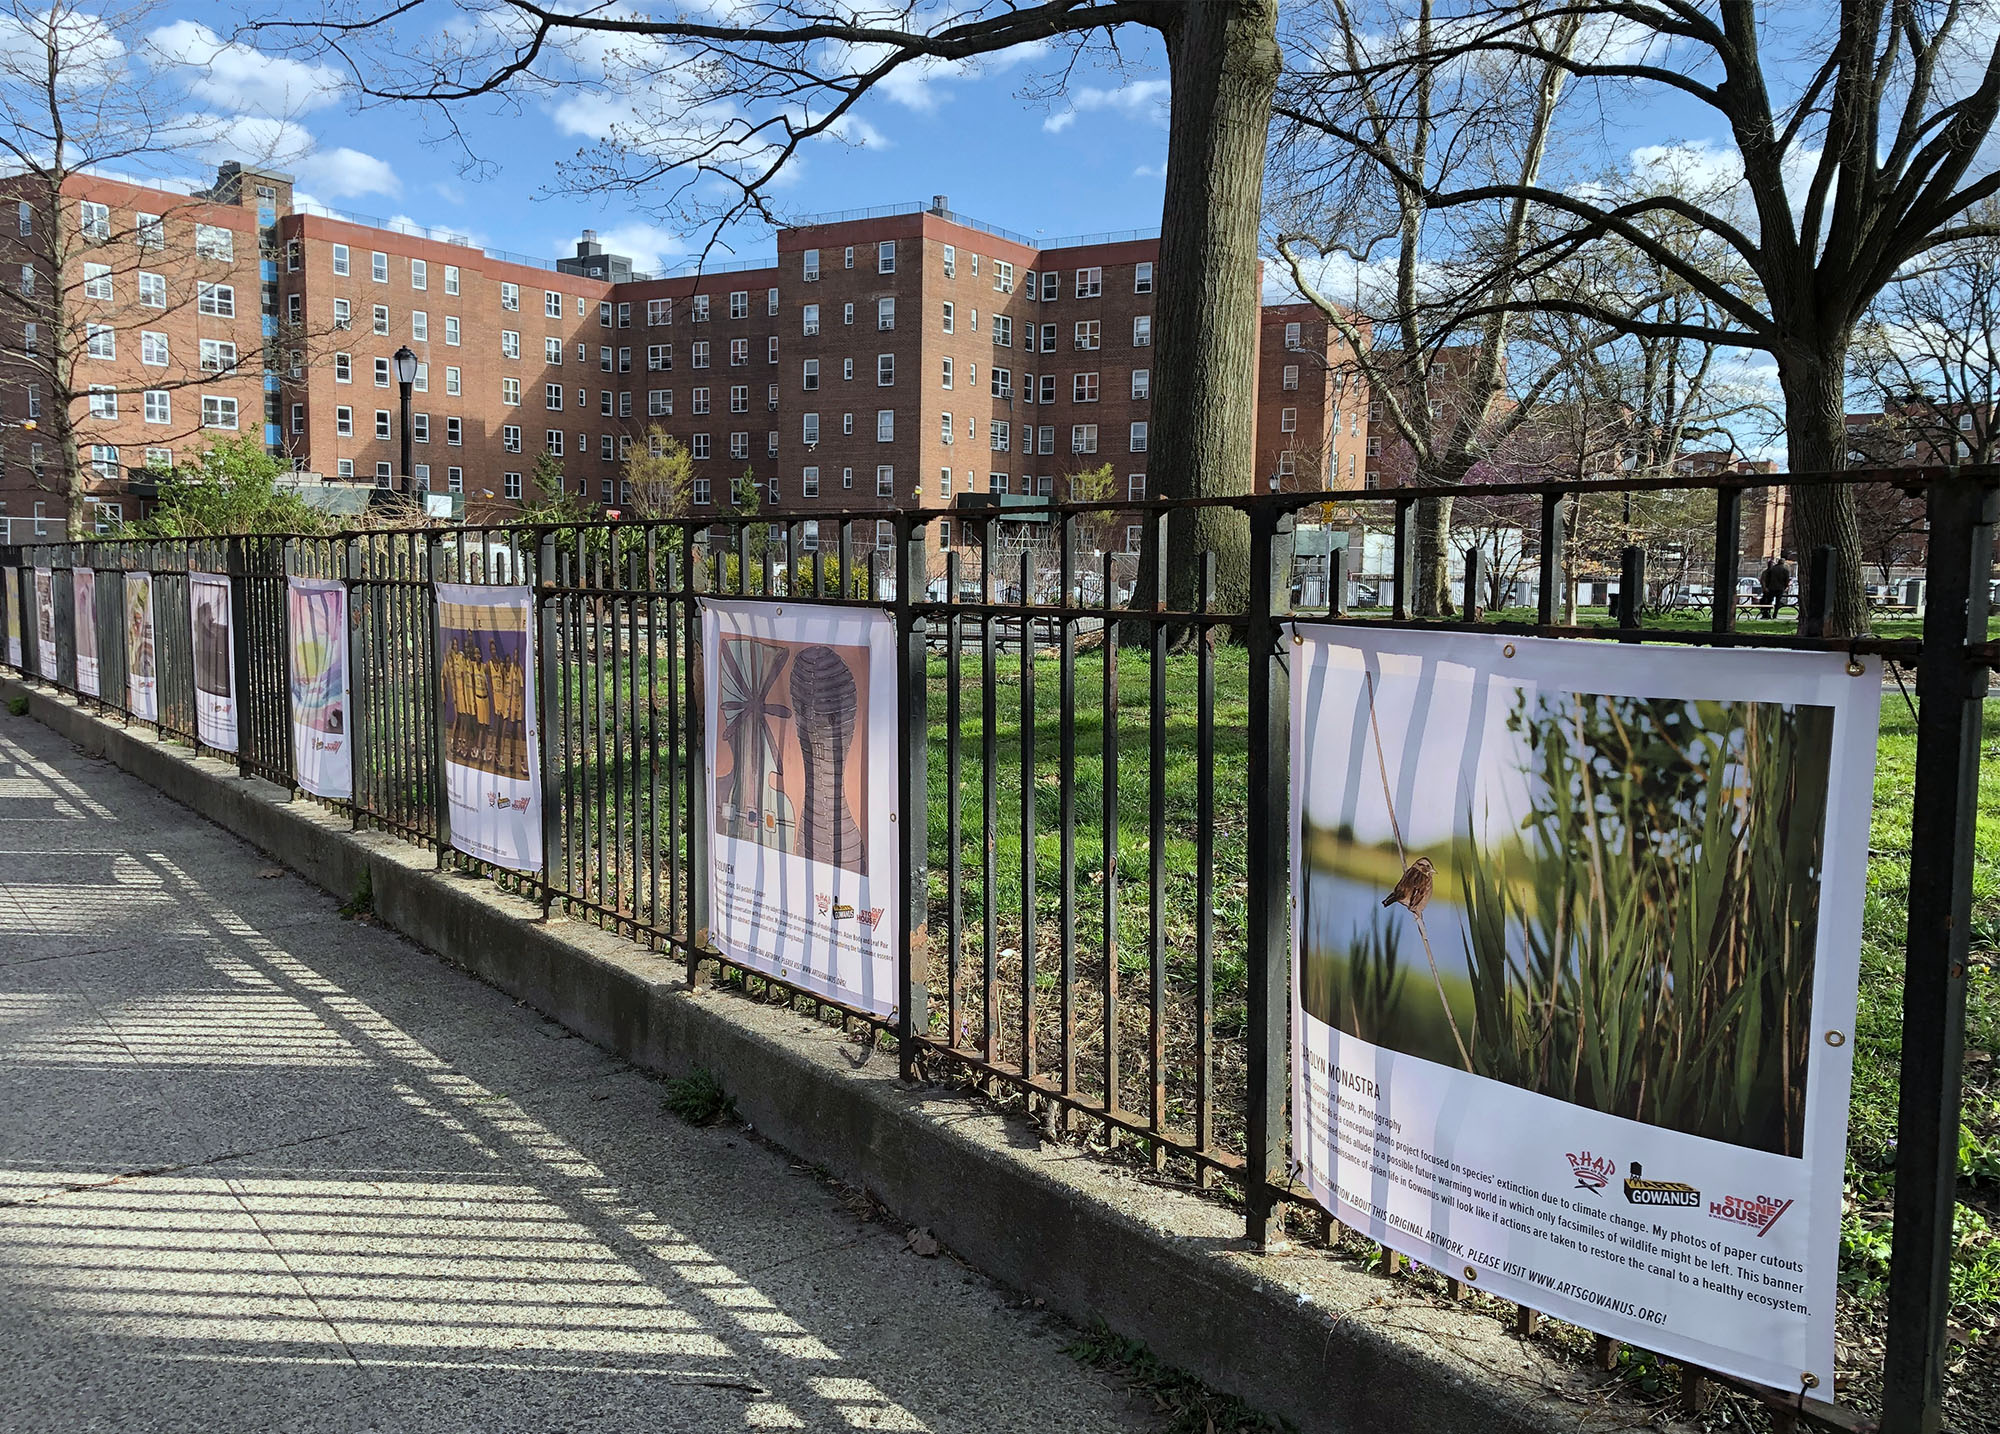 The artist’s image of a “Swamp Sparrow hanging alongside other artists’ banners which were displayed in Coffey Park, Brooklyn. These banners were also a part of the exhibit Brooklyn Utopias, Along the Canal, Spring 2022.